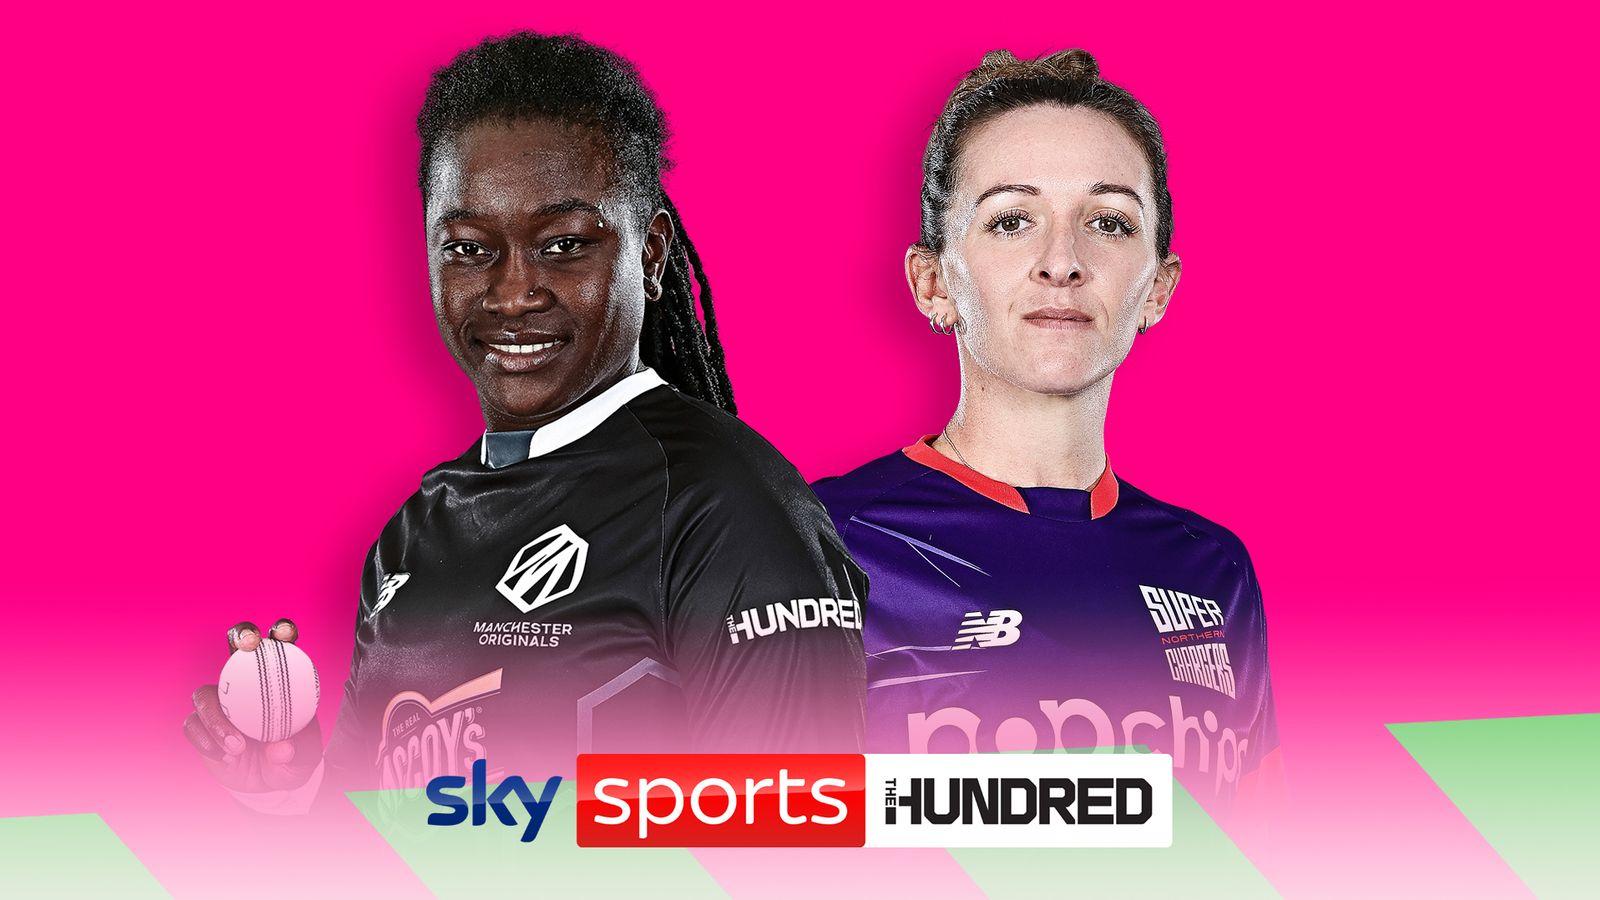 FREE STREAM Watch Manchester Originals vs Northern Superchargers in The Hundred on Sky Sports digital platforms Flipboard